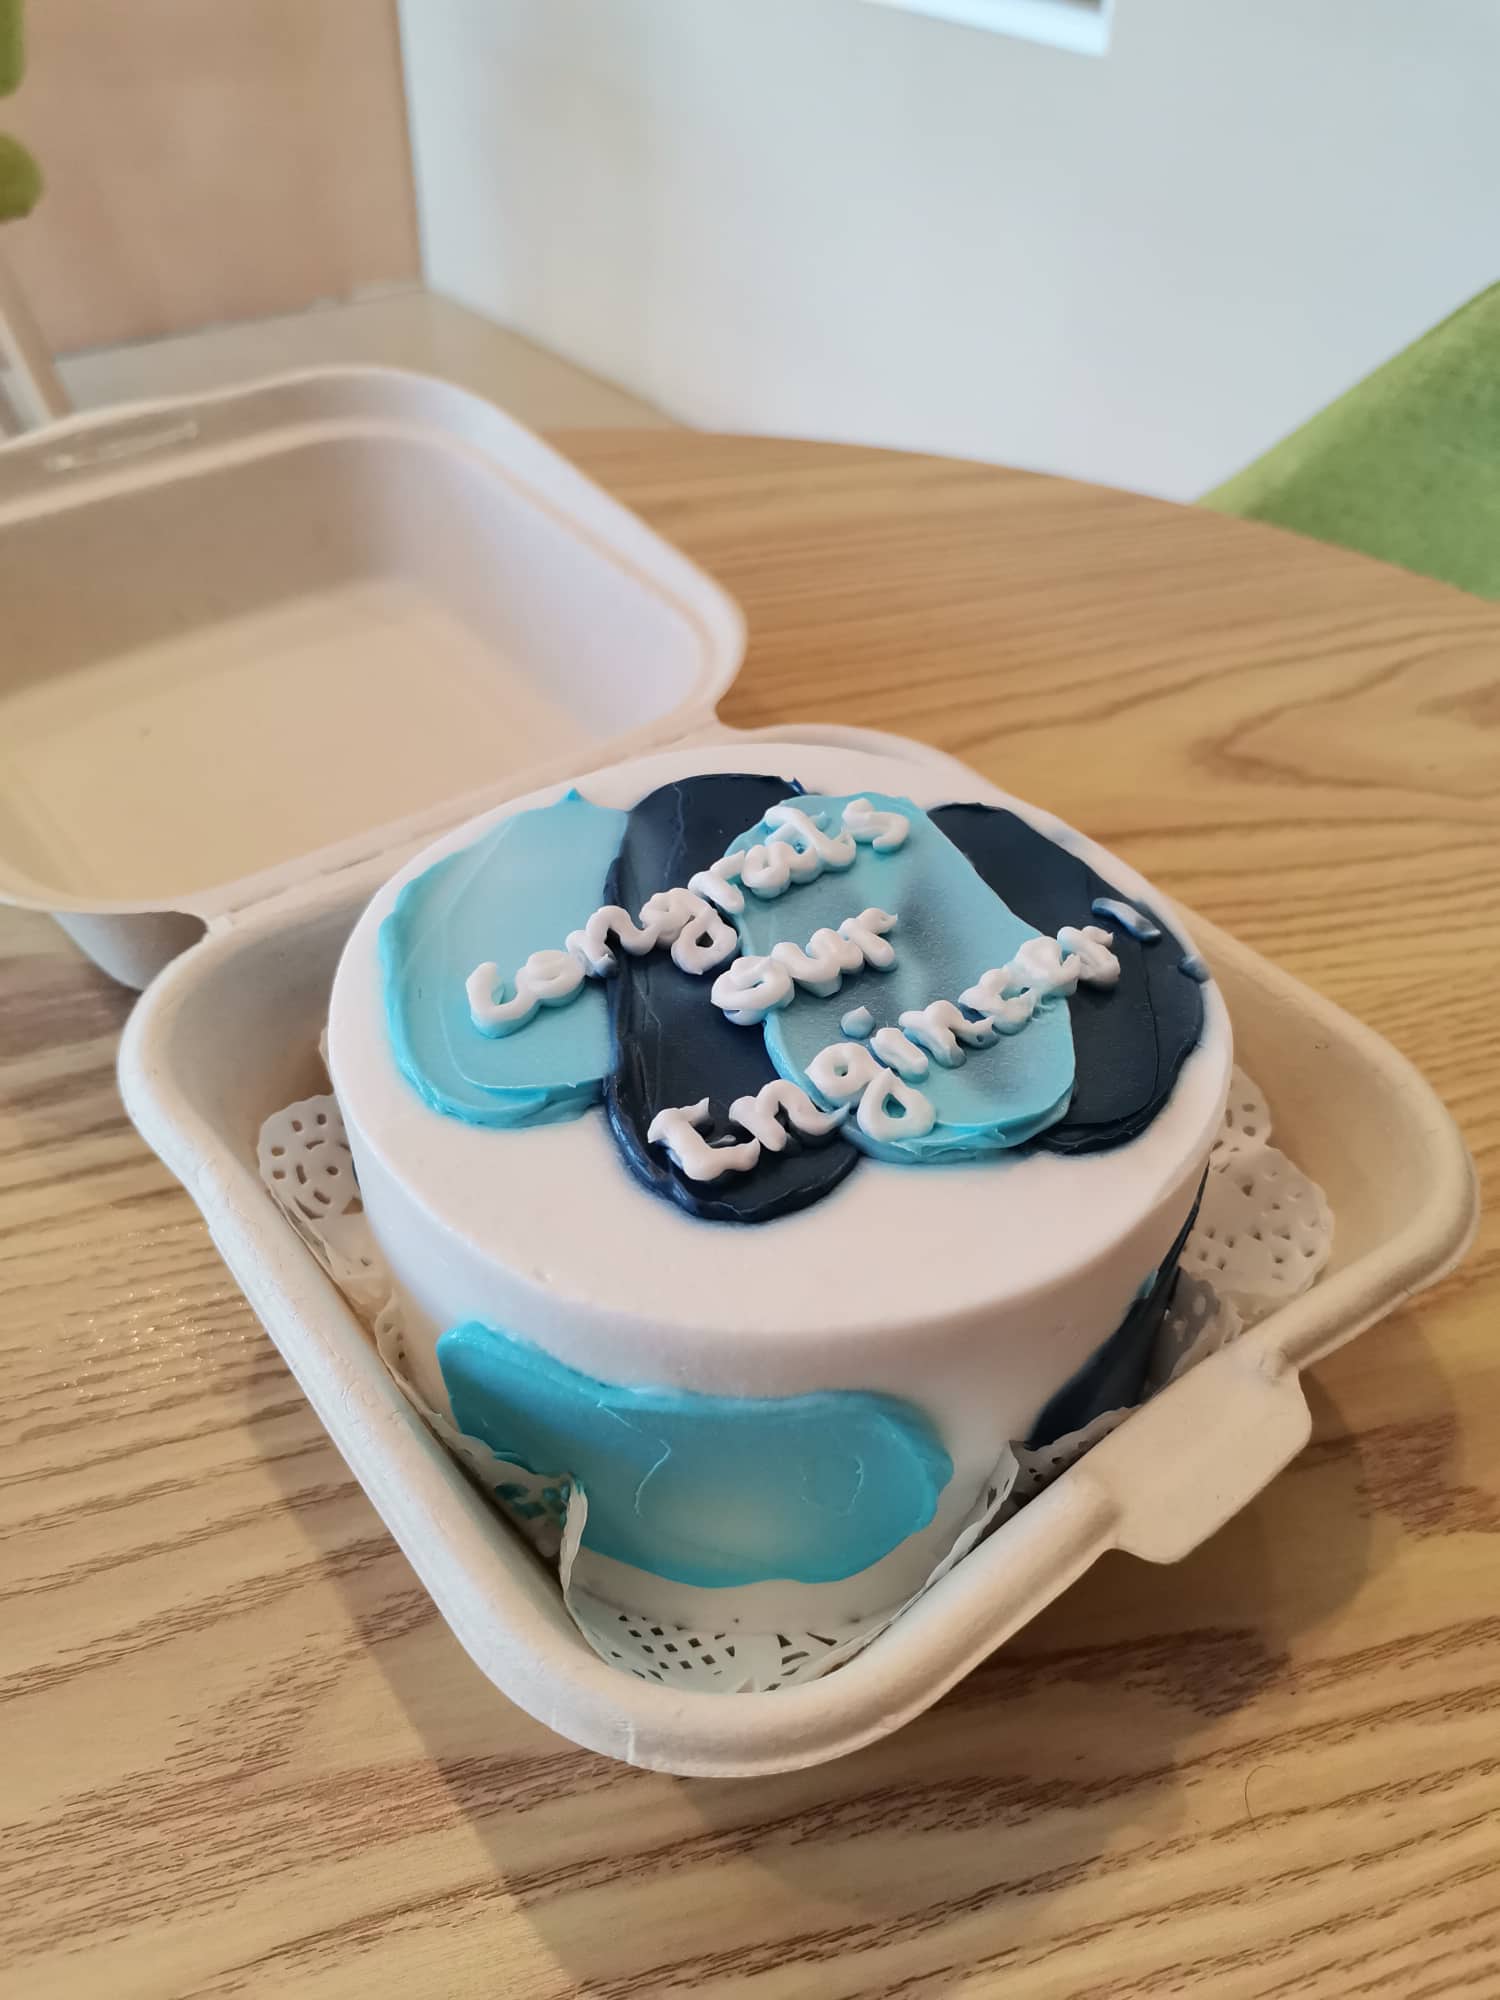 IT Engineer Cake in Pune | Just Cakes